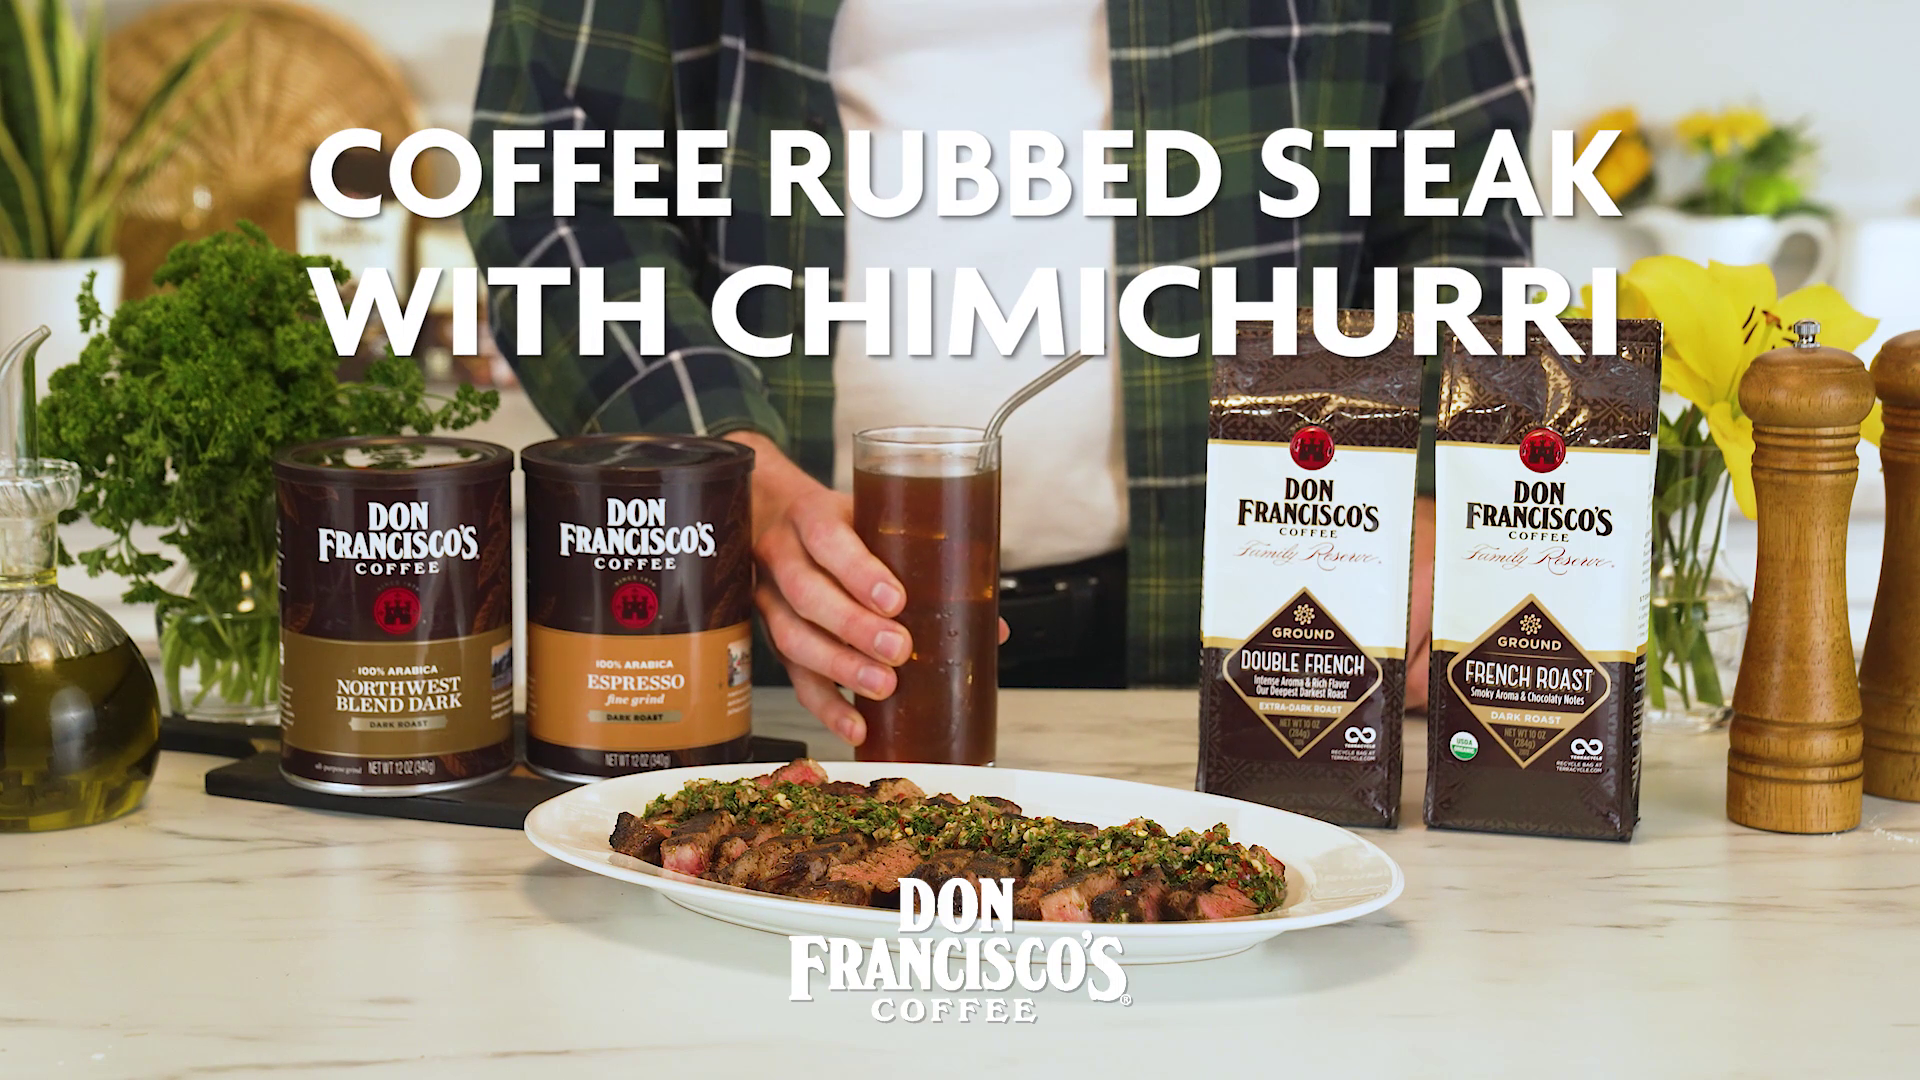 Coffee-Rubbed Steak with Chimichurri – Don Francisco's Coffee